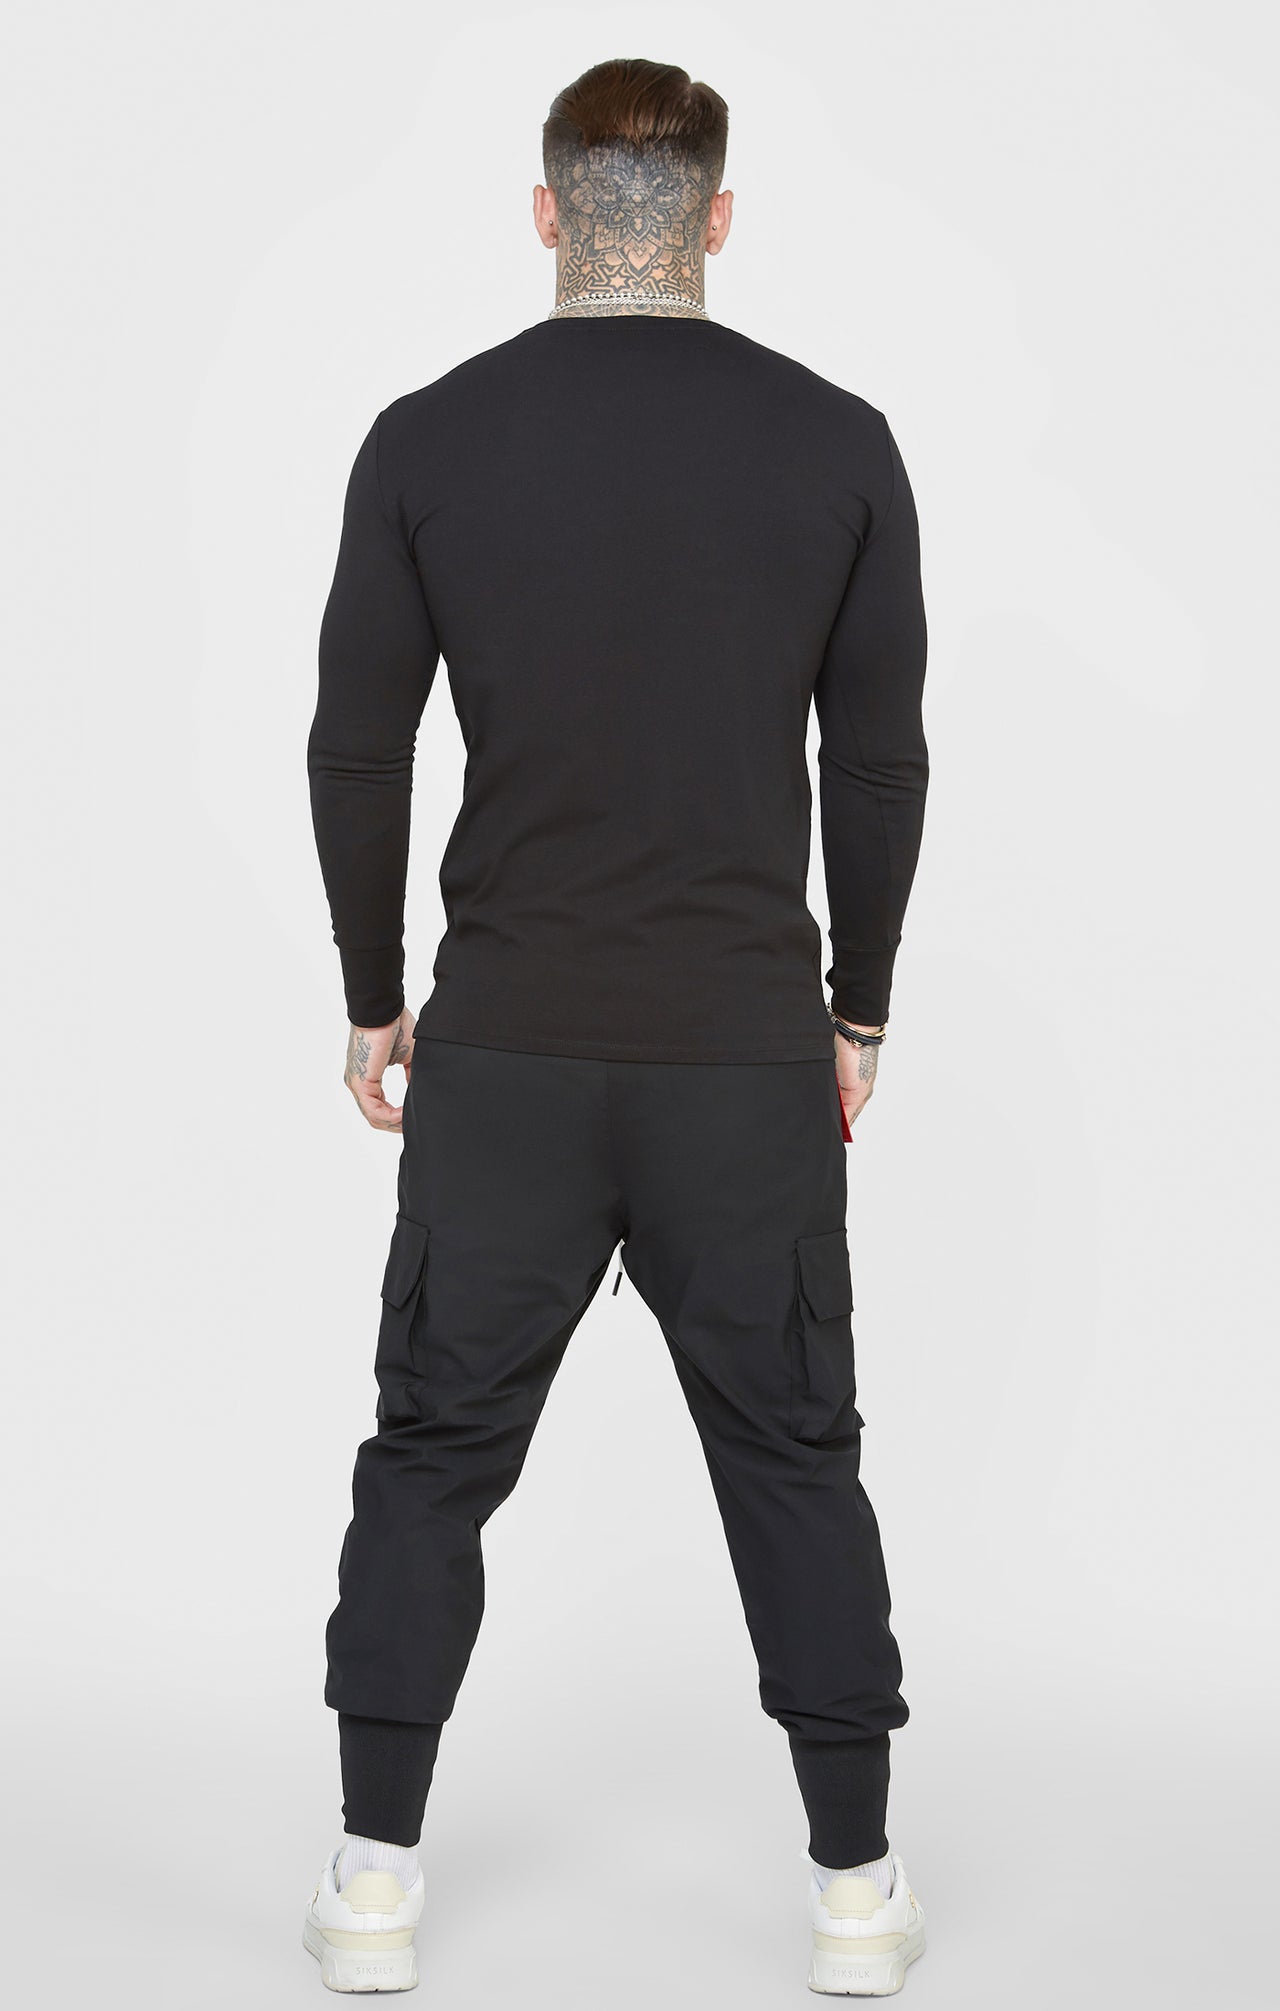 Black Long Sleeve Muscle Fit T-Shirt (4)